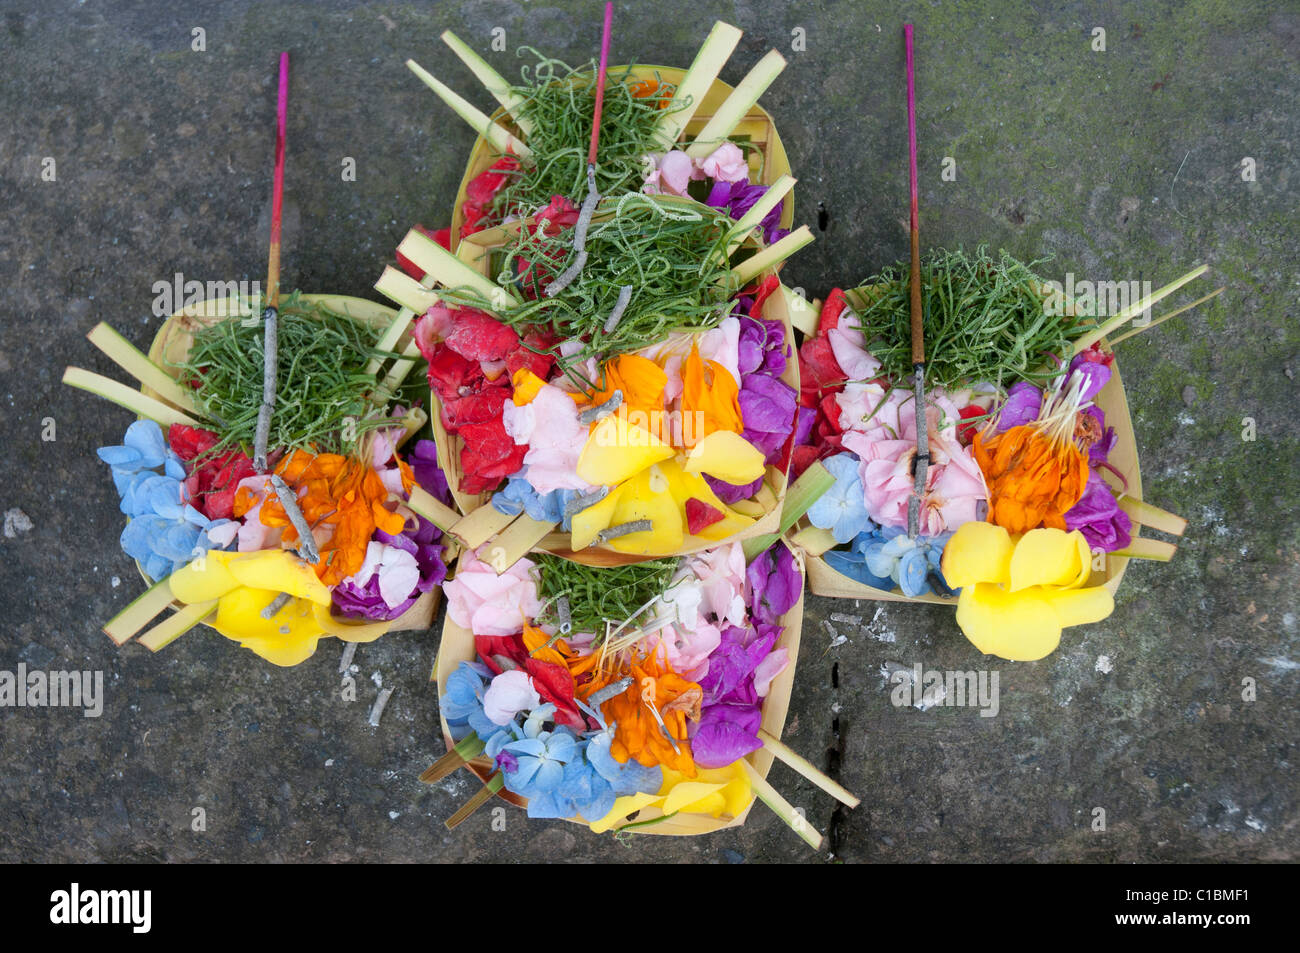 Morning offerings on the footpath in Ubud Bali Indonesia Stock Photo